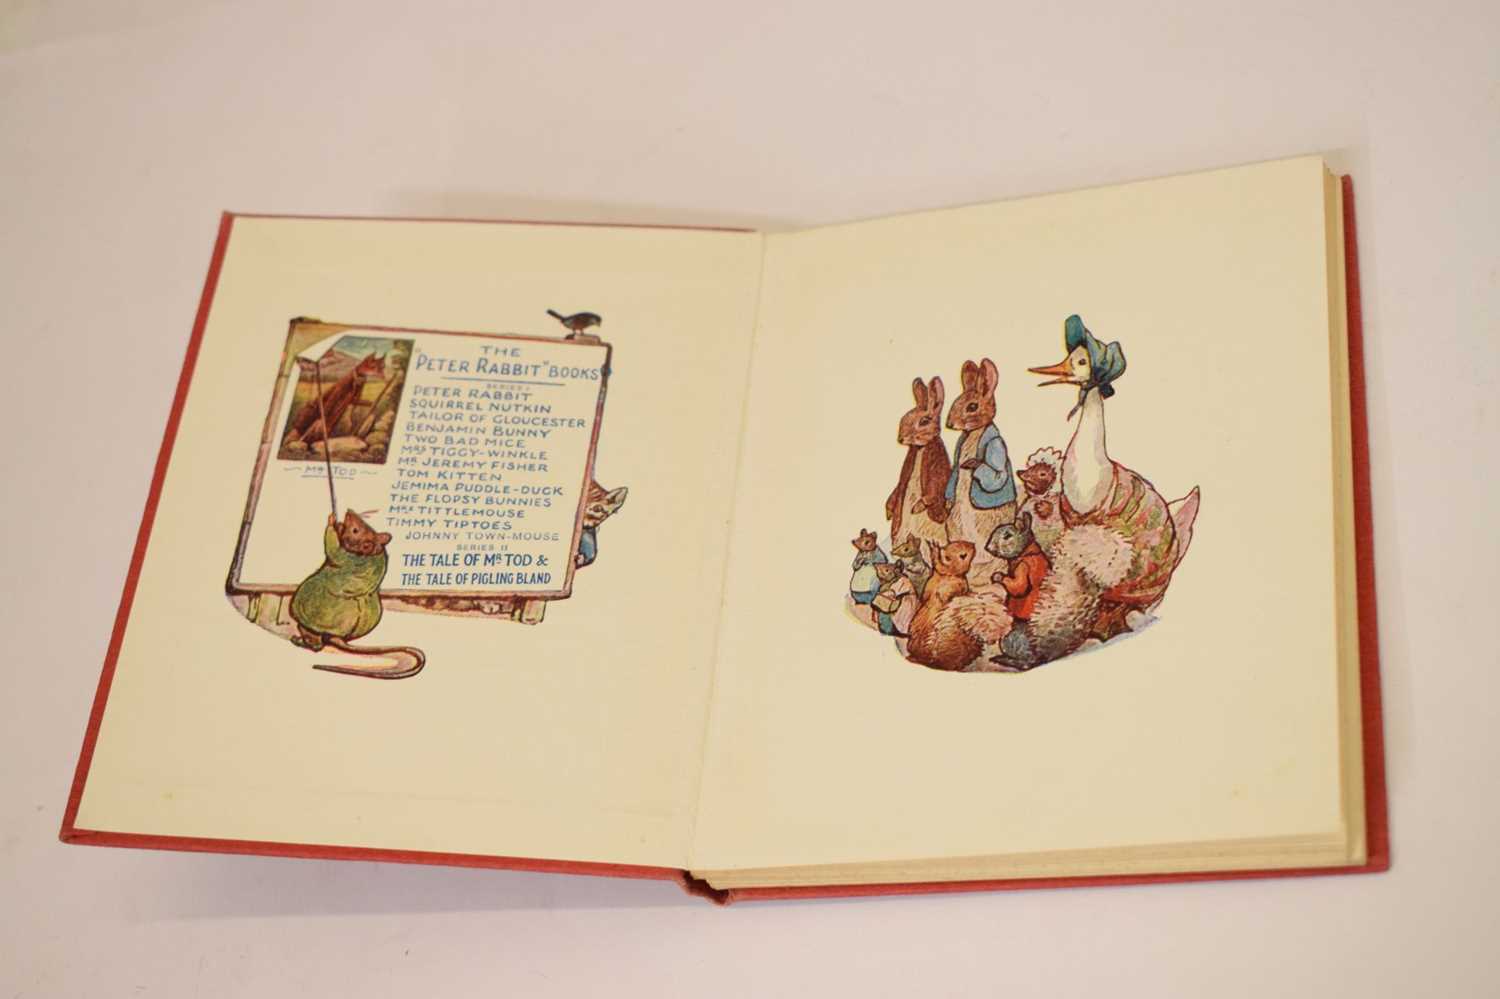 Potter, Beatrix - 'Cecily Parsley's Nursery Rhymes' - First edition - Image 6 of 23